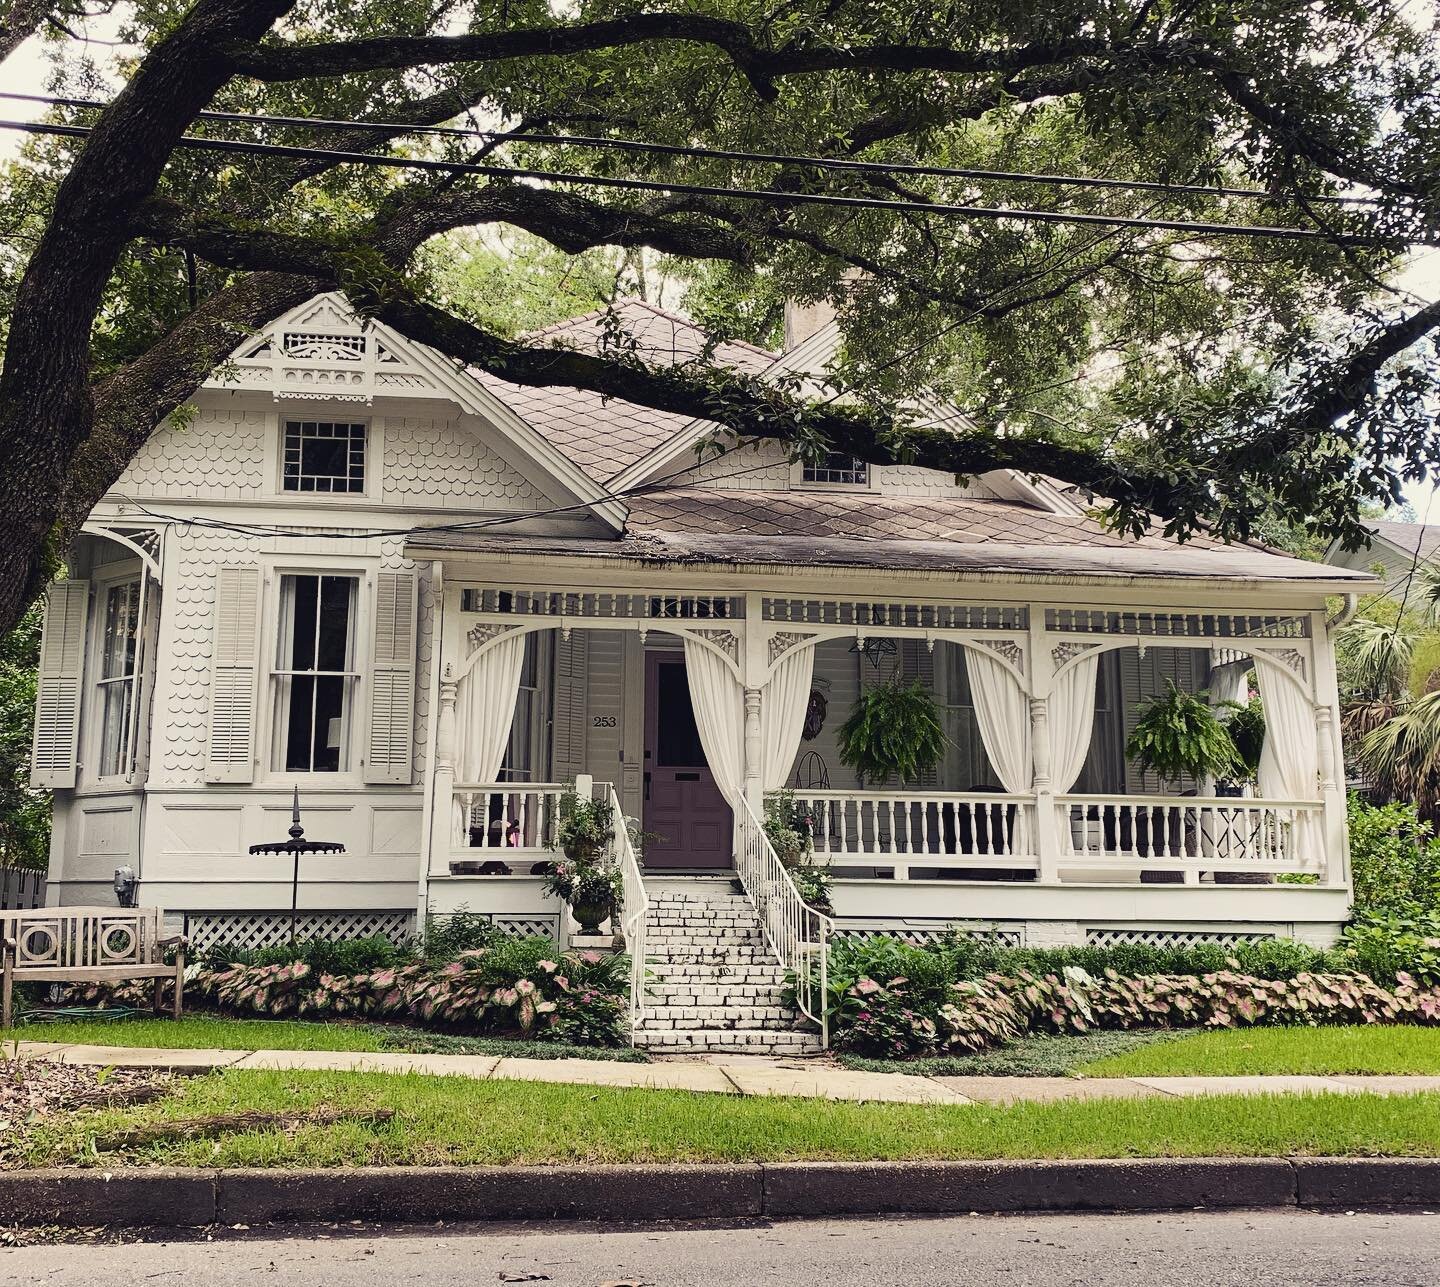 Here&rsquo;s another one in the Oakleigh Garden Historic District in Mobile, Alabama.